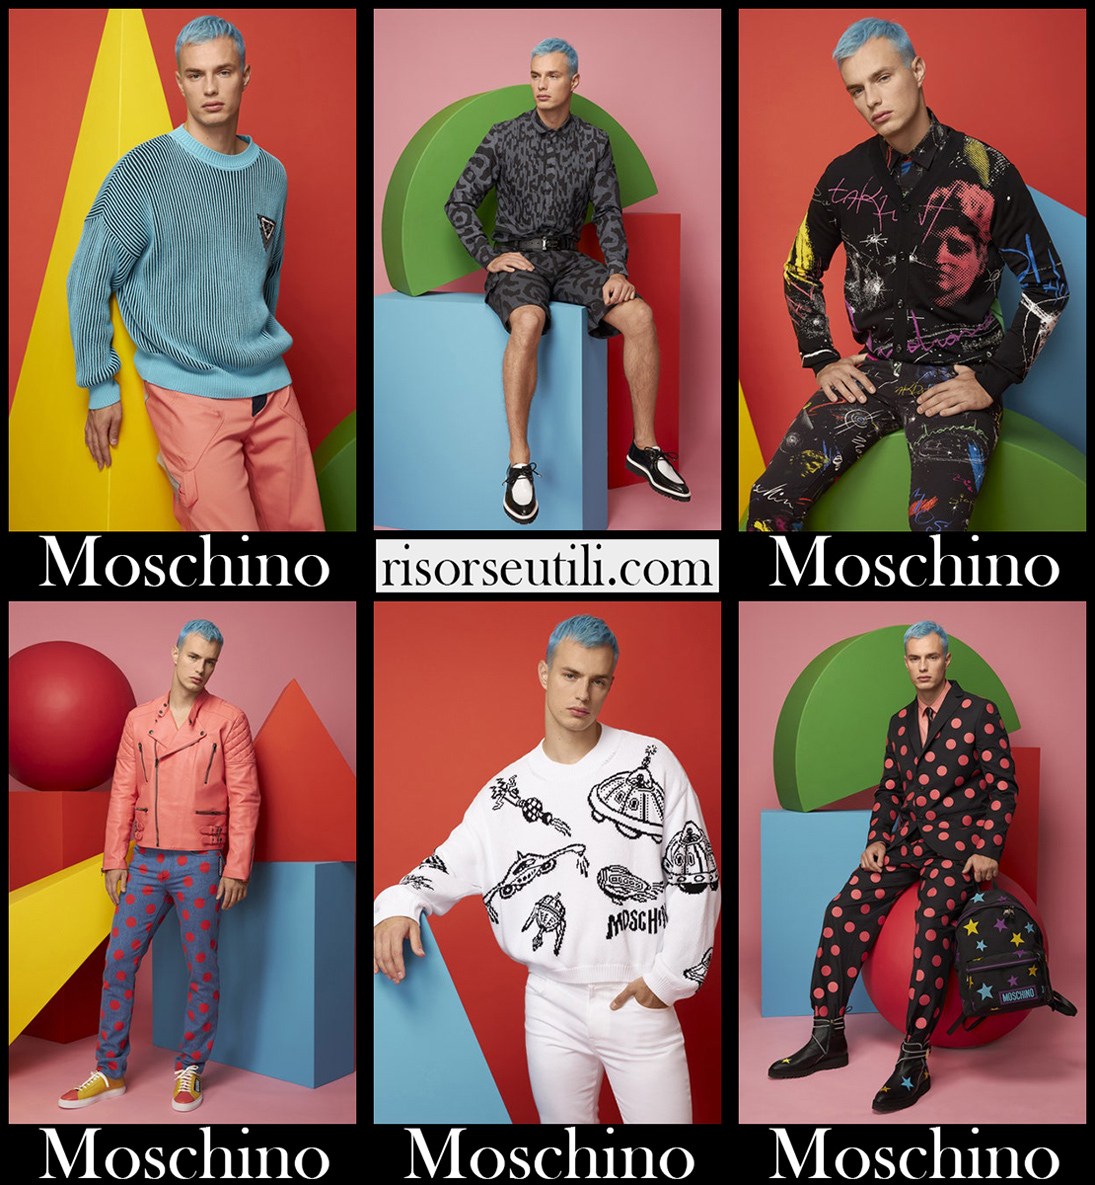 New arrivals Moschino Resort 2021 mens pre collection